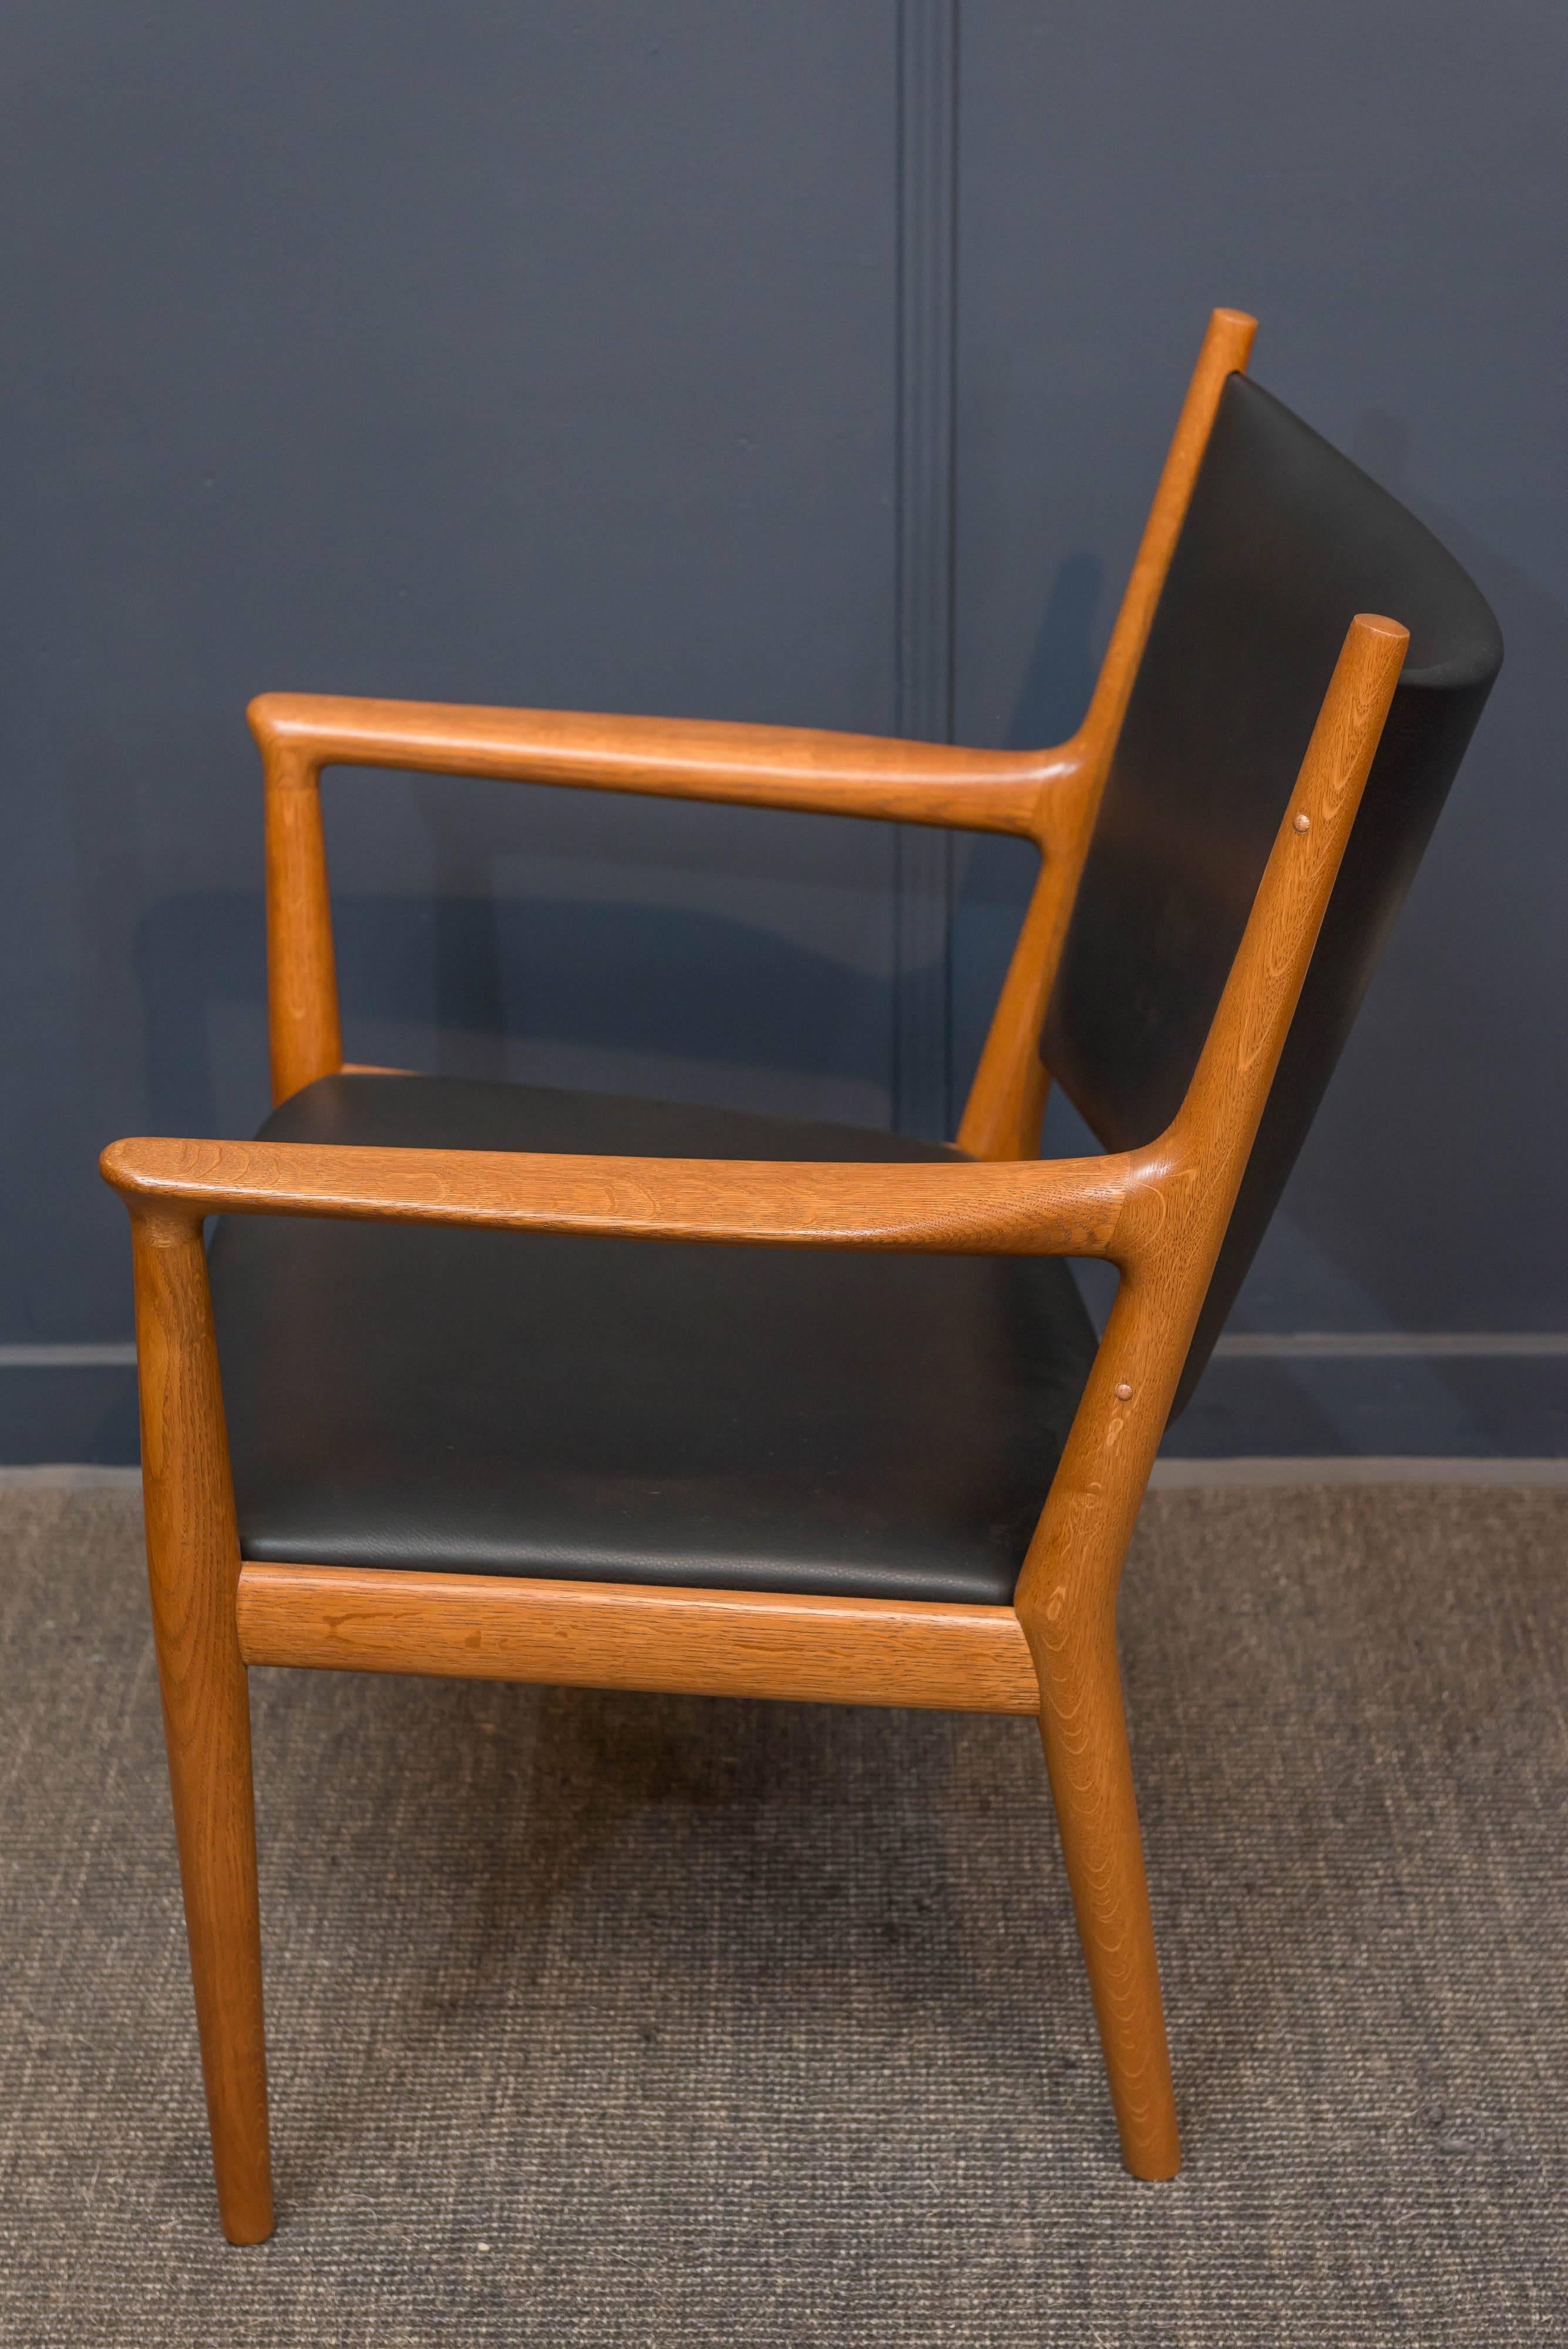 Hans J Wegner Lounge Chair In Excellent Condition For Sale In San Francisco, CA